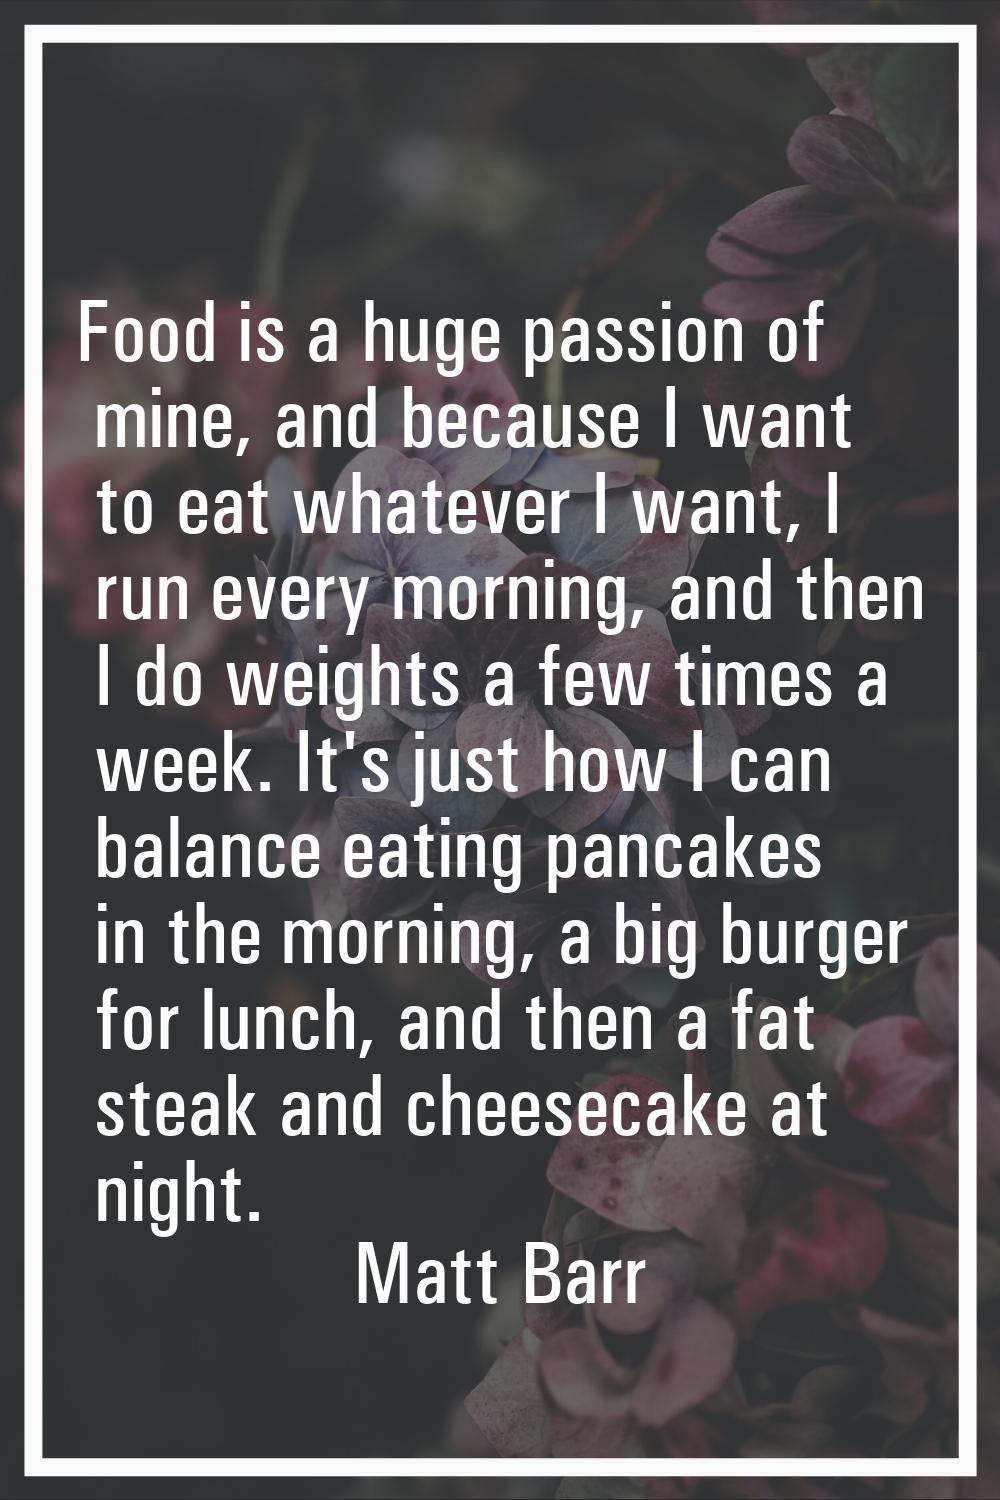 Food is a huge passion of mine, and because I want to eat whatever I want, I run every morning, and